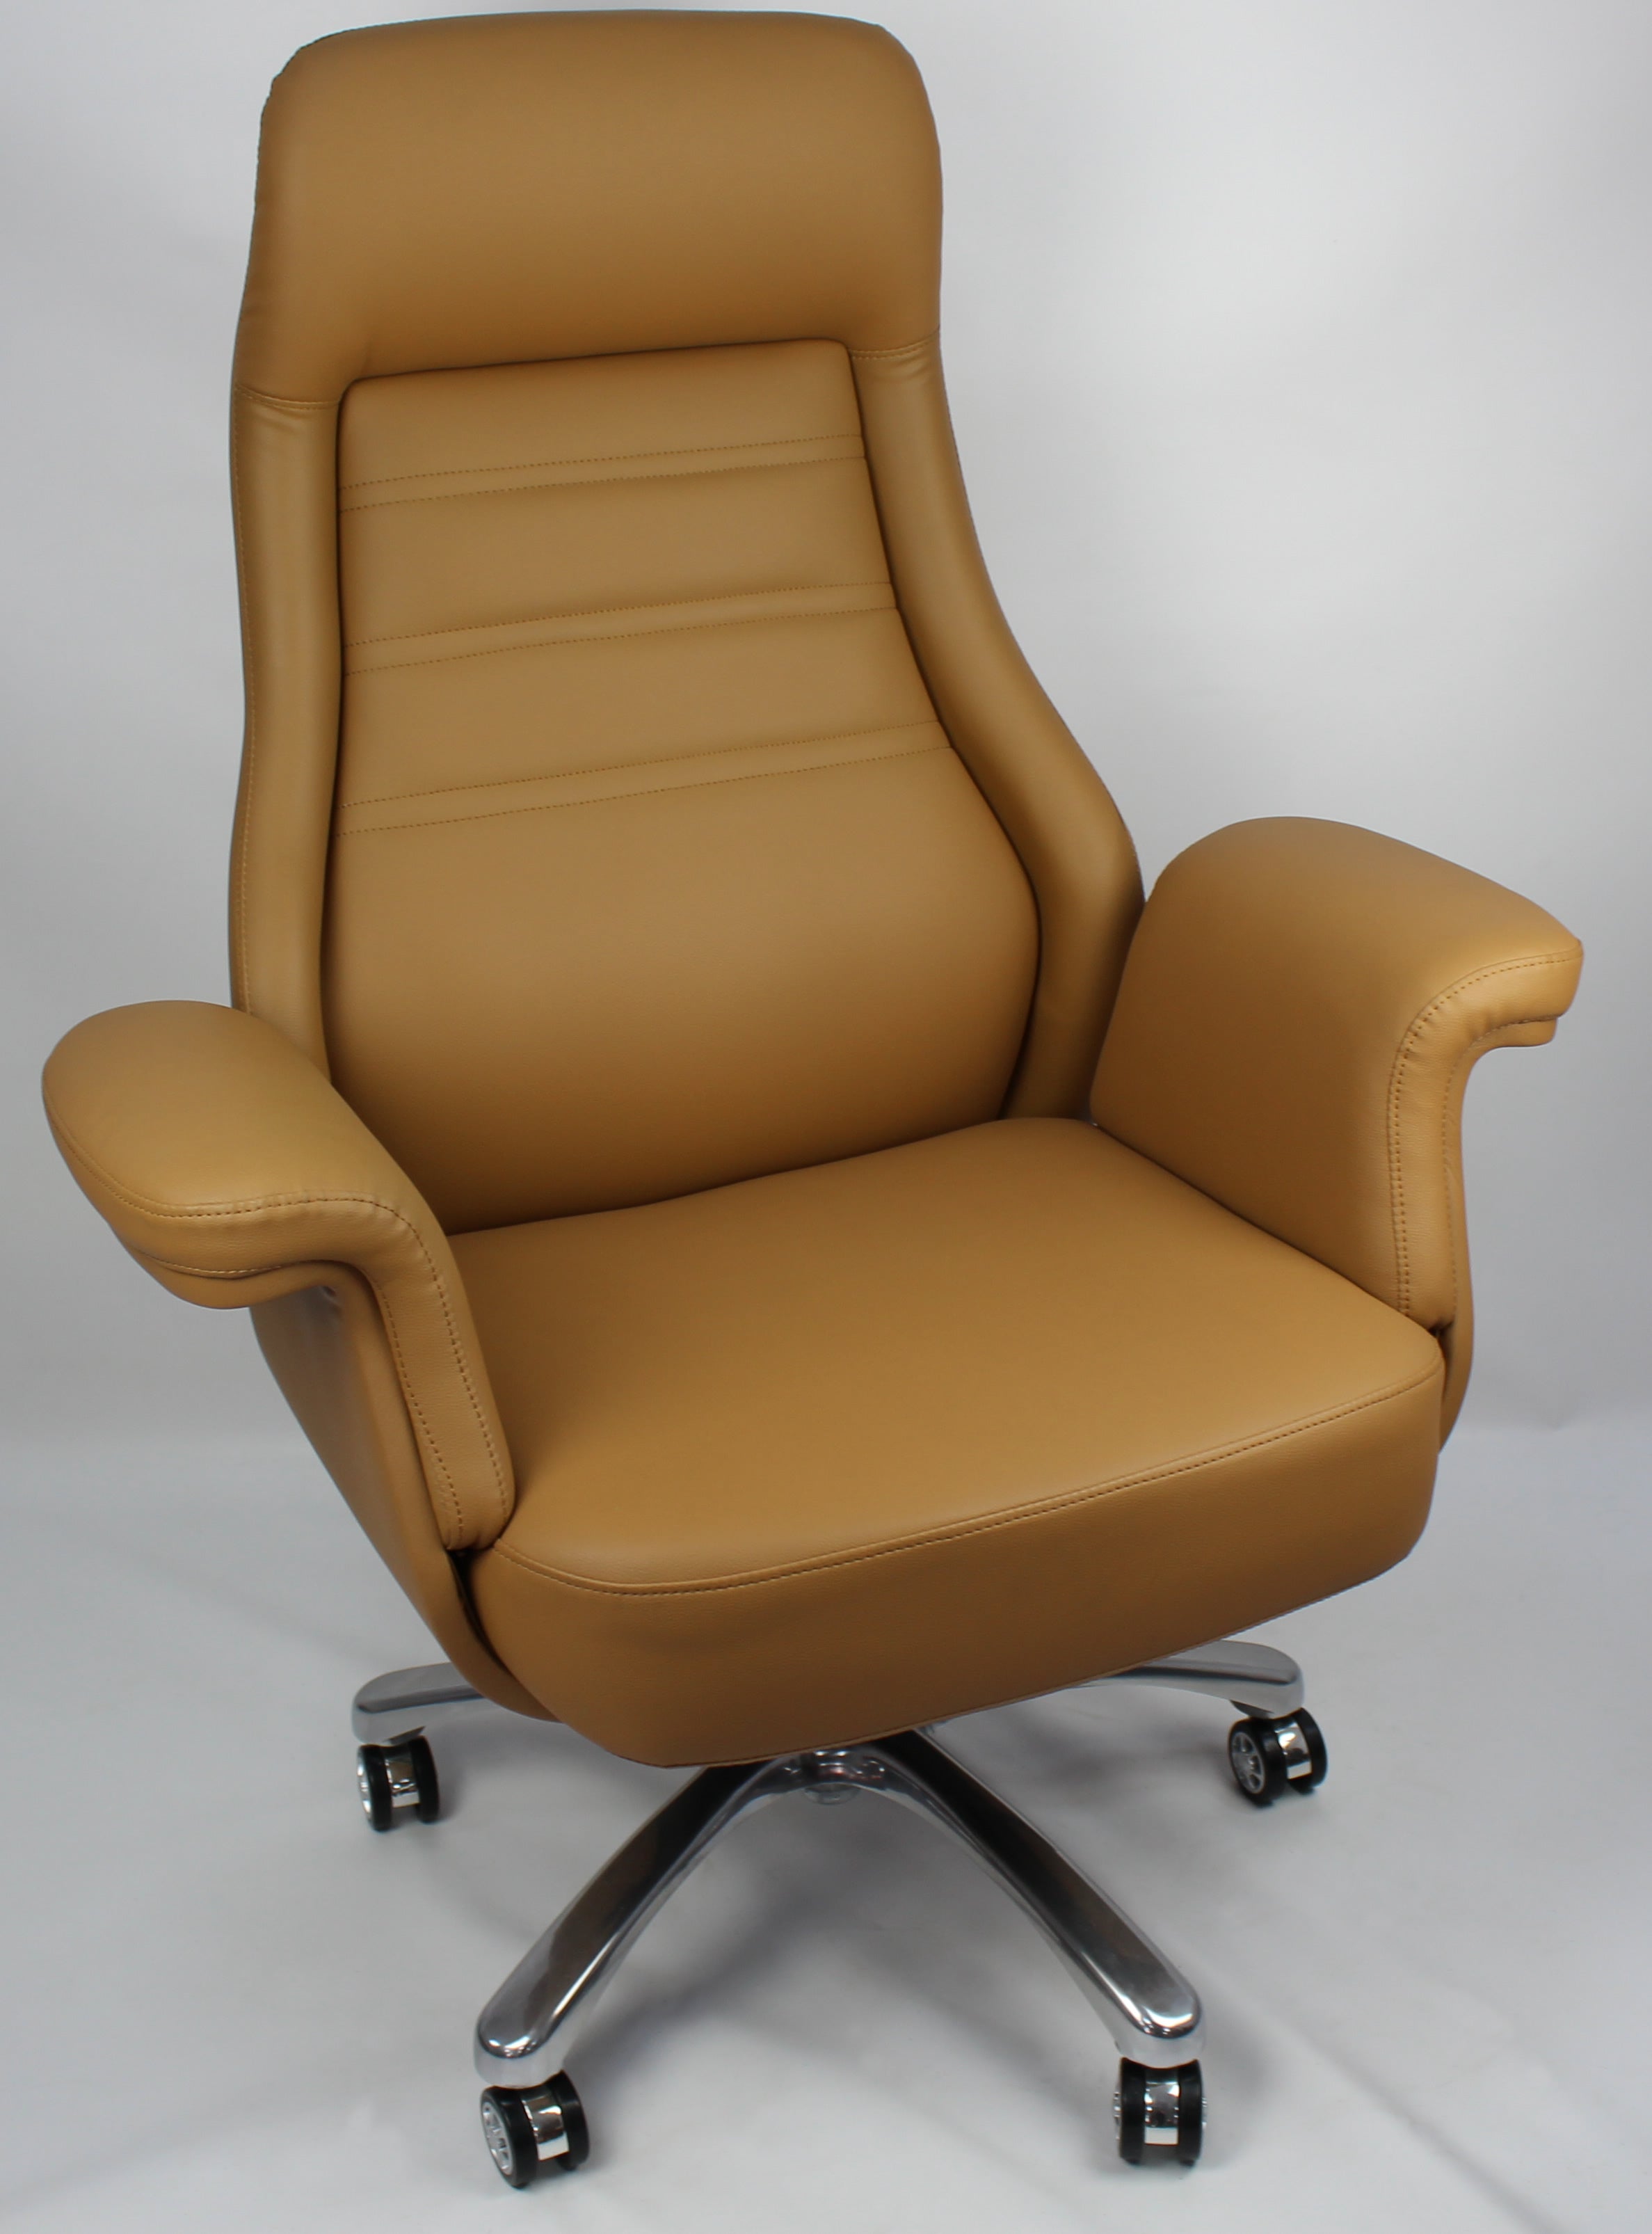 Beige Leather Executive Office Chair - DH-090 UK